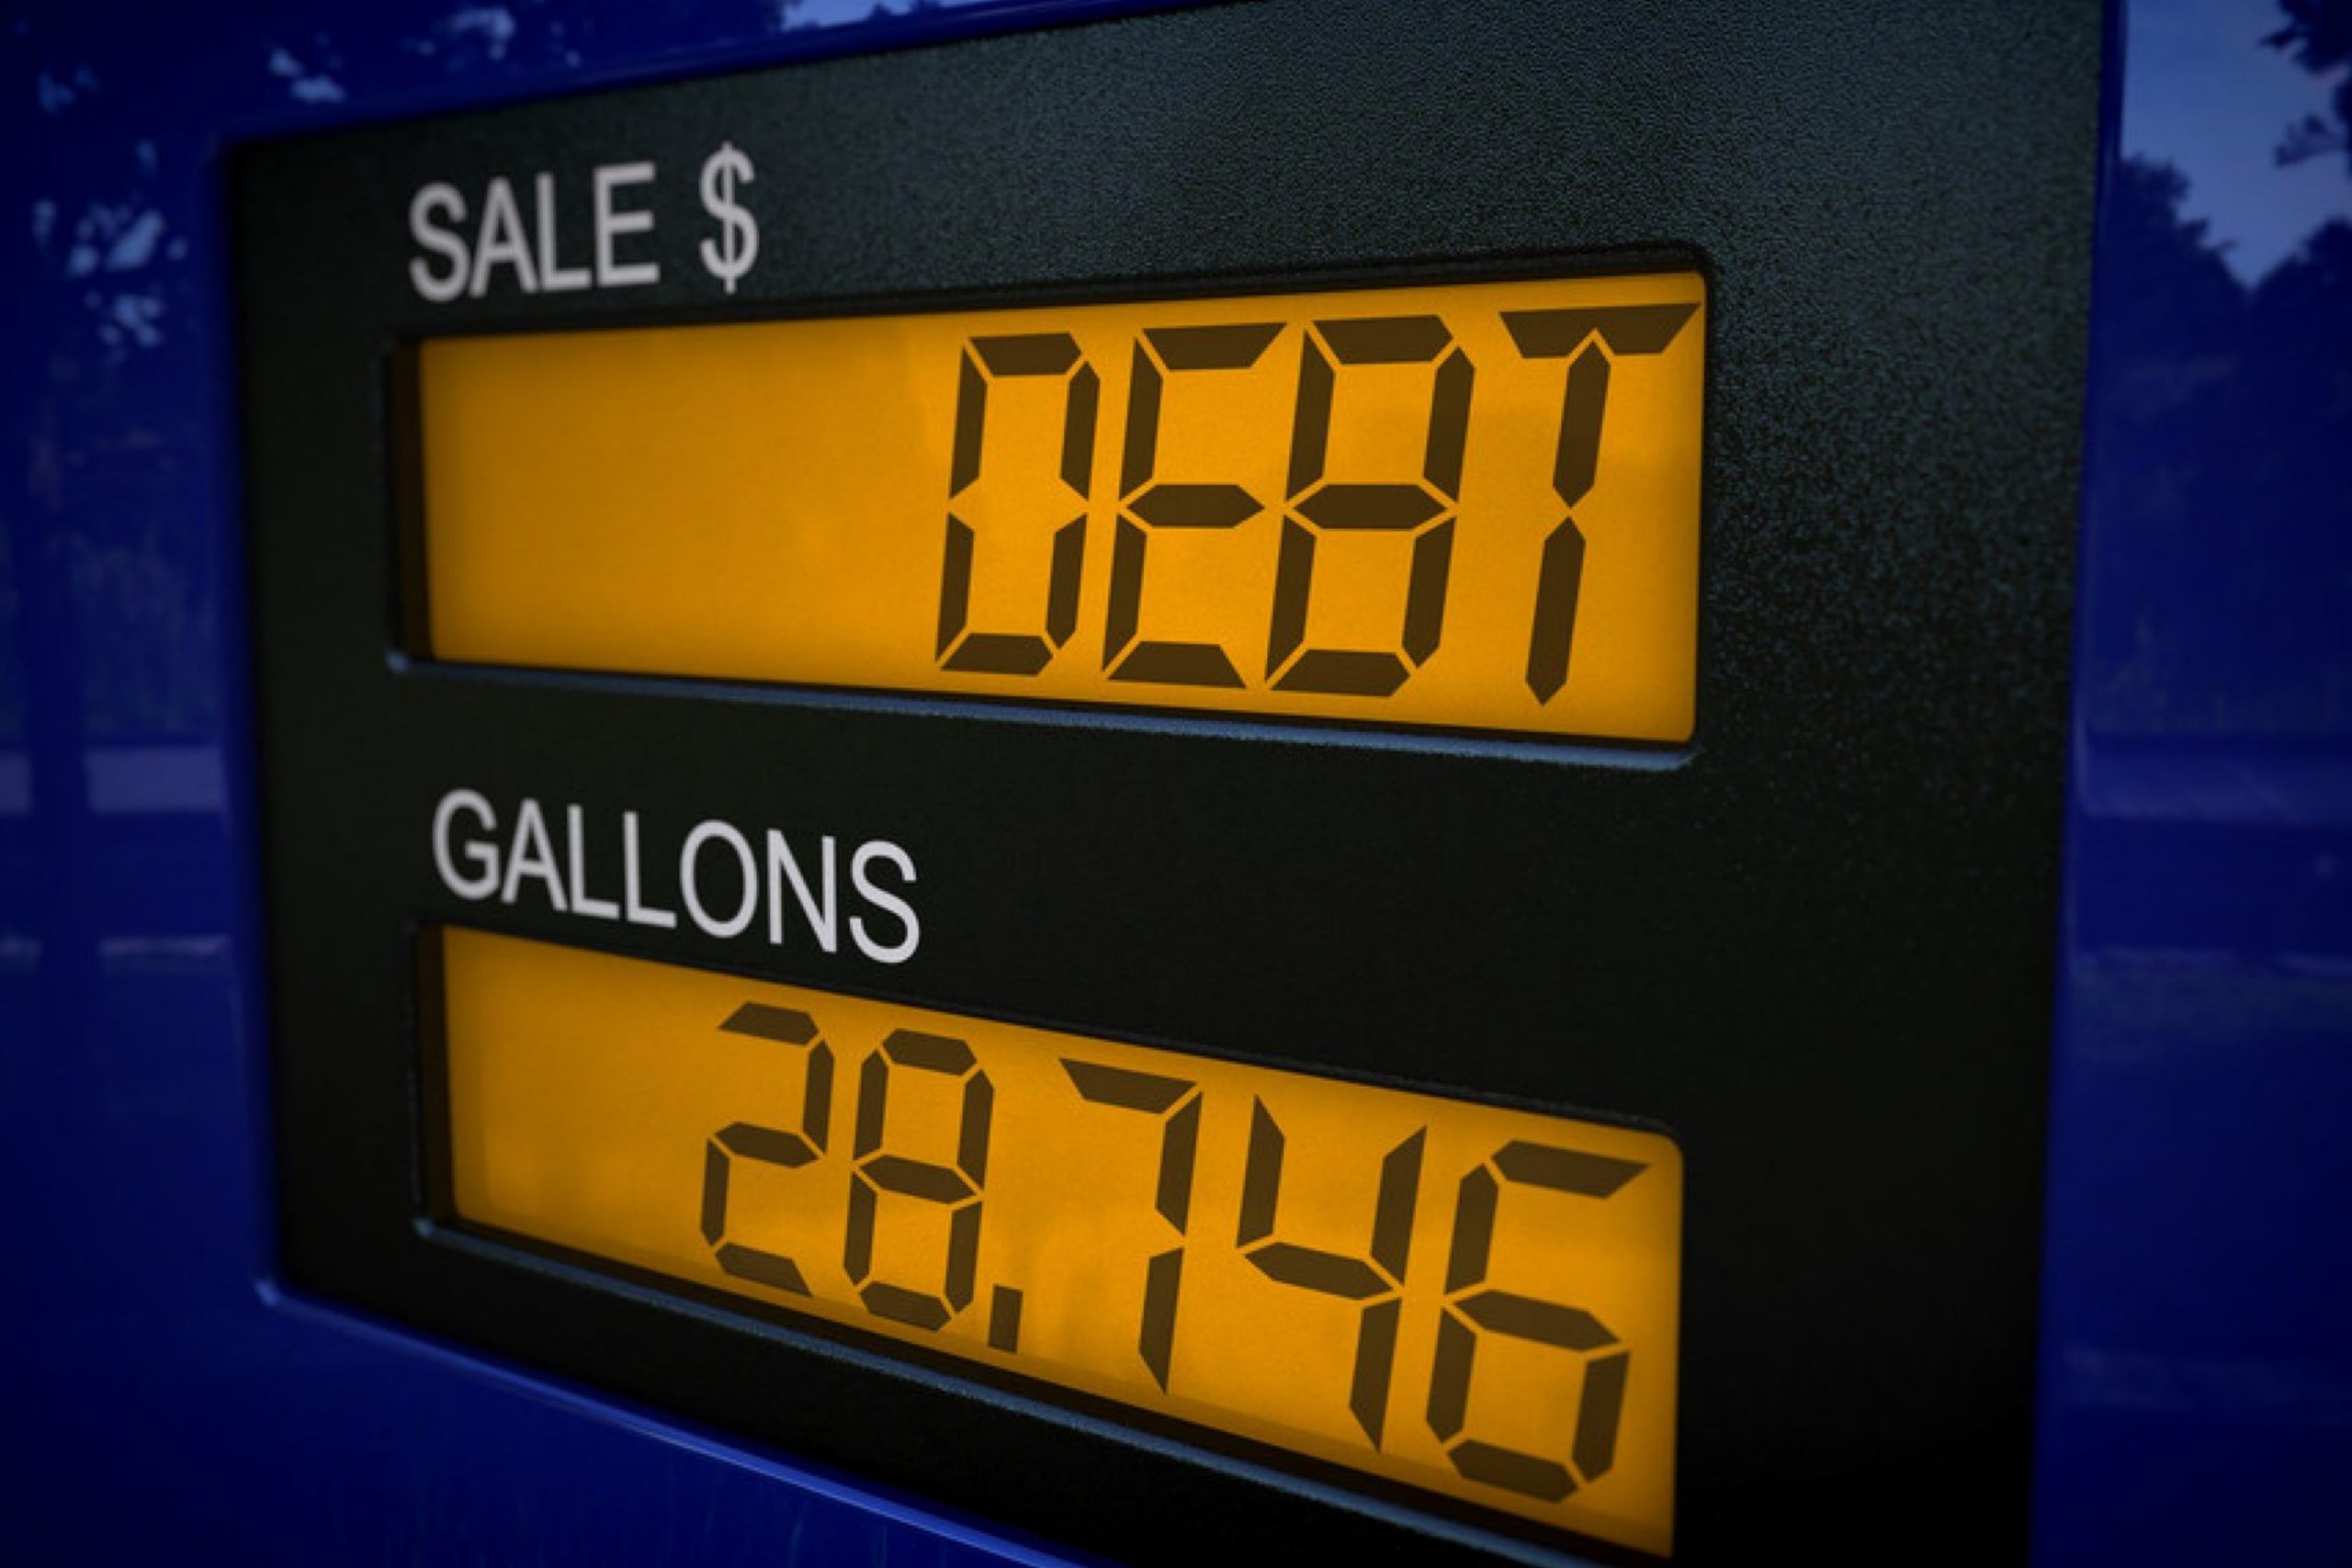 Gas Prices Could Impact the Price of Your Home